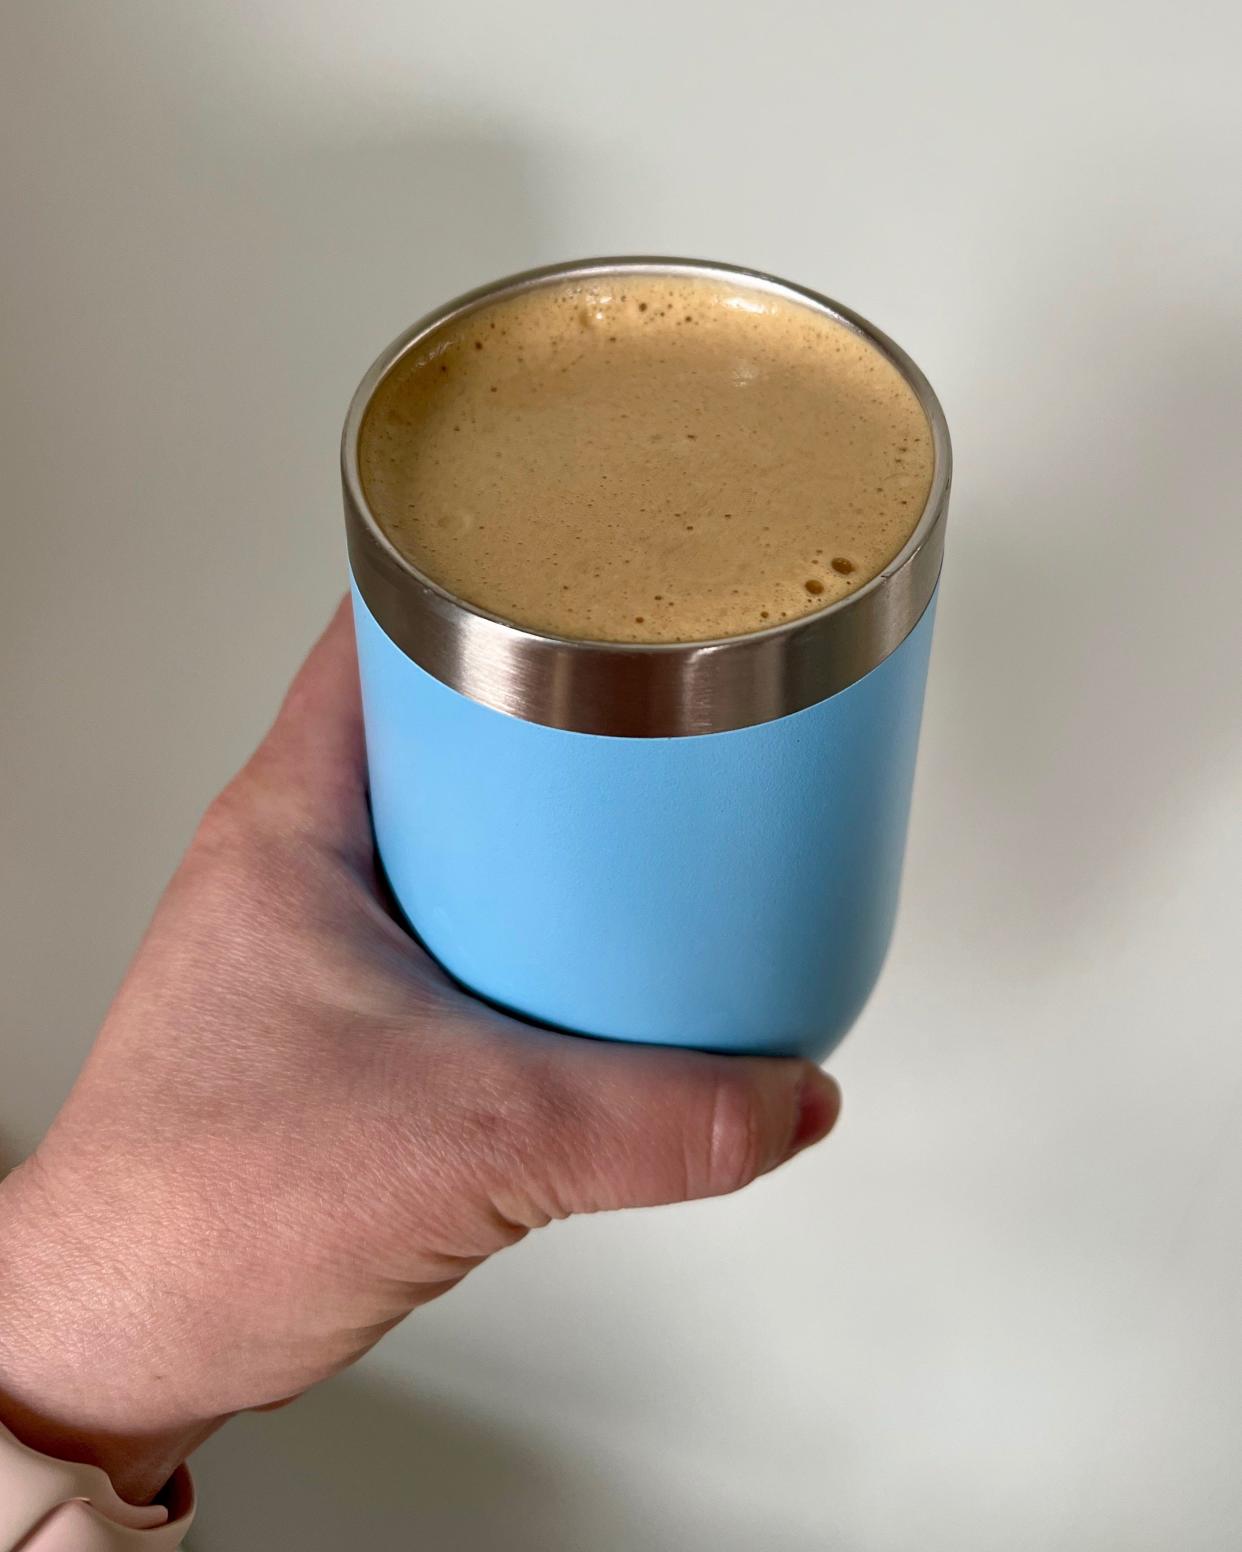 Mixing instant coffee with protein powder results in a drink that tastes like a vanilla frappe coffee drink but packs 20 to 30 grams of protein — about 20% of what the average adult needs. Photo courtesy of Katherine Grandstrand